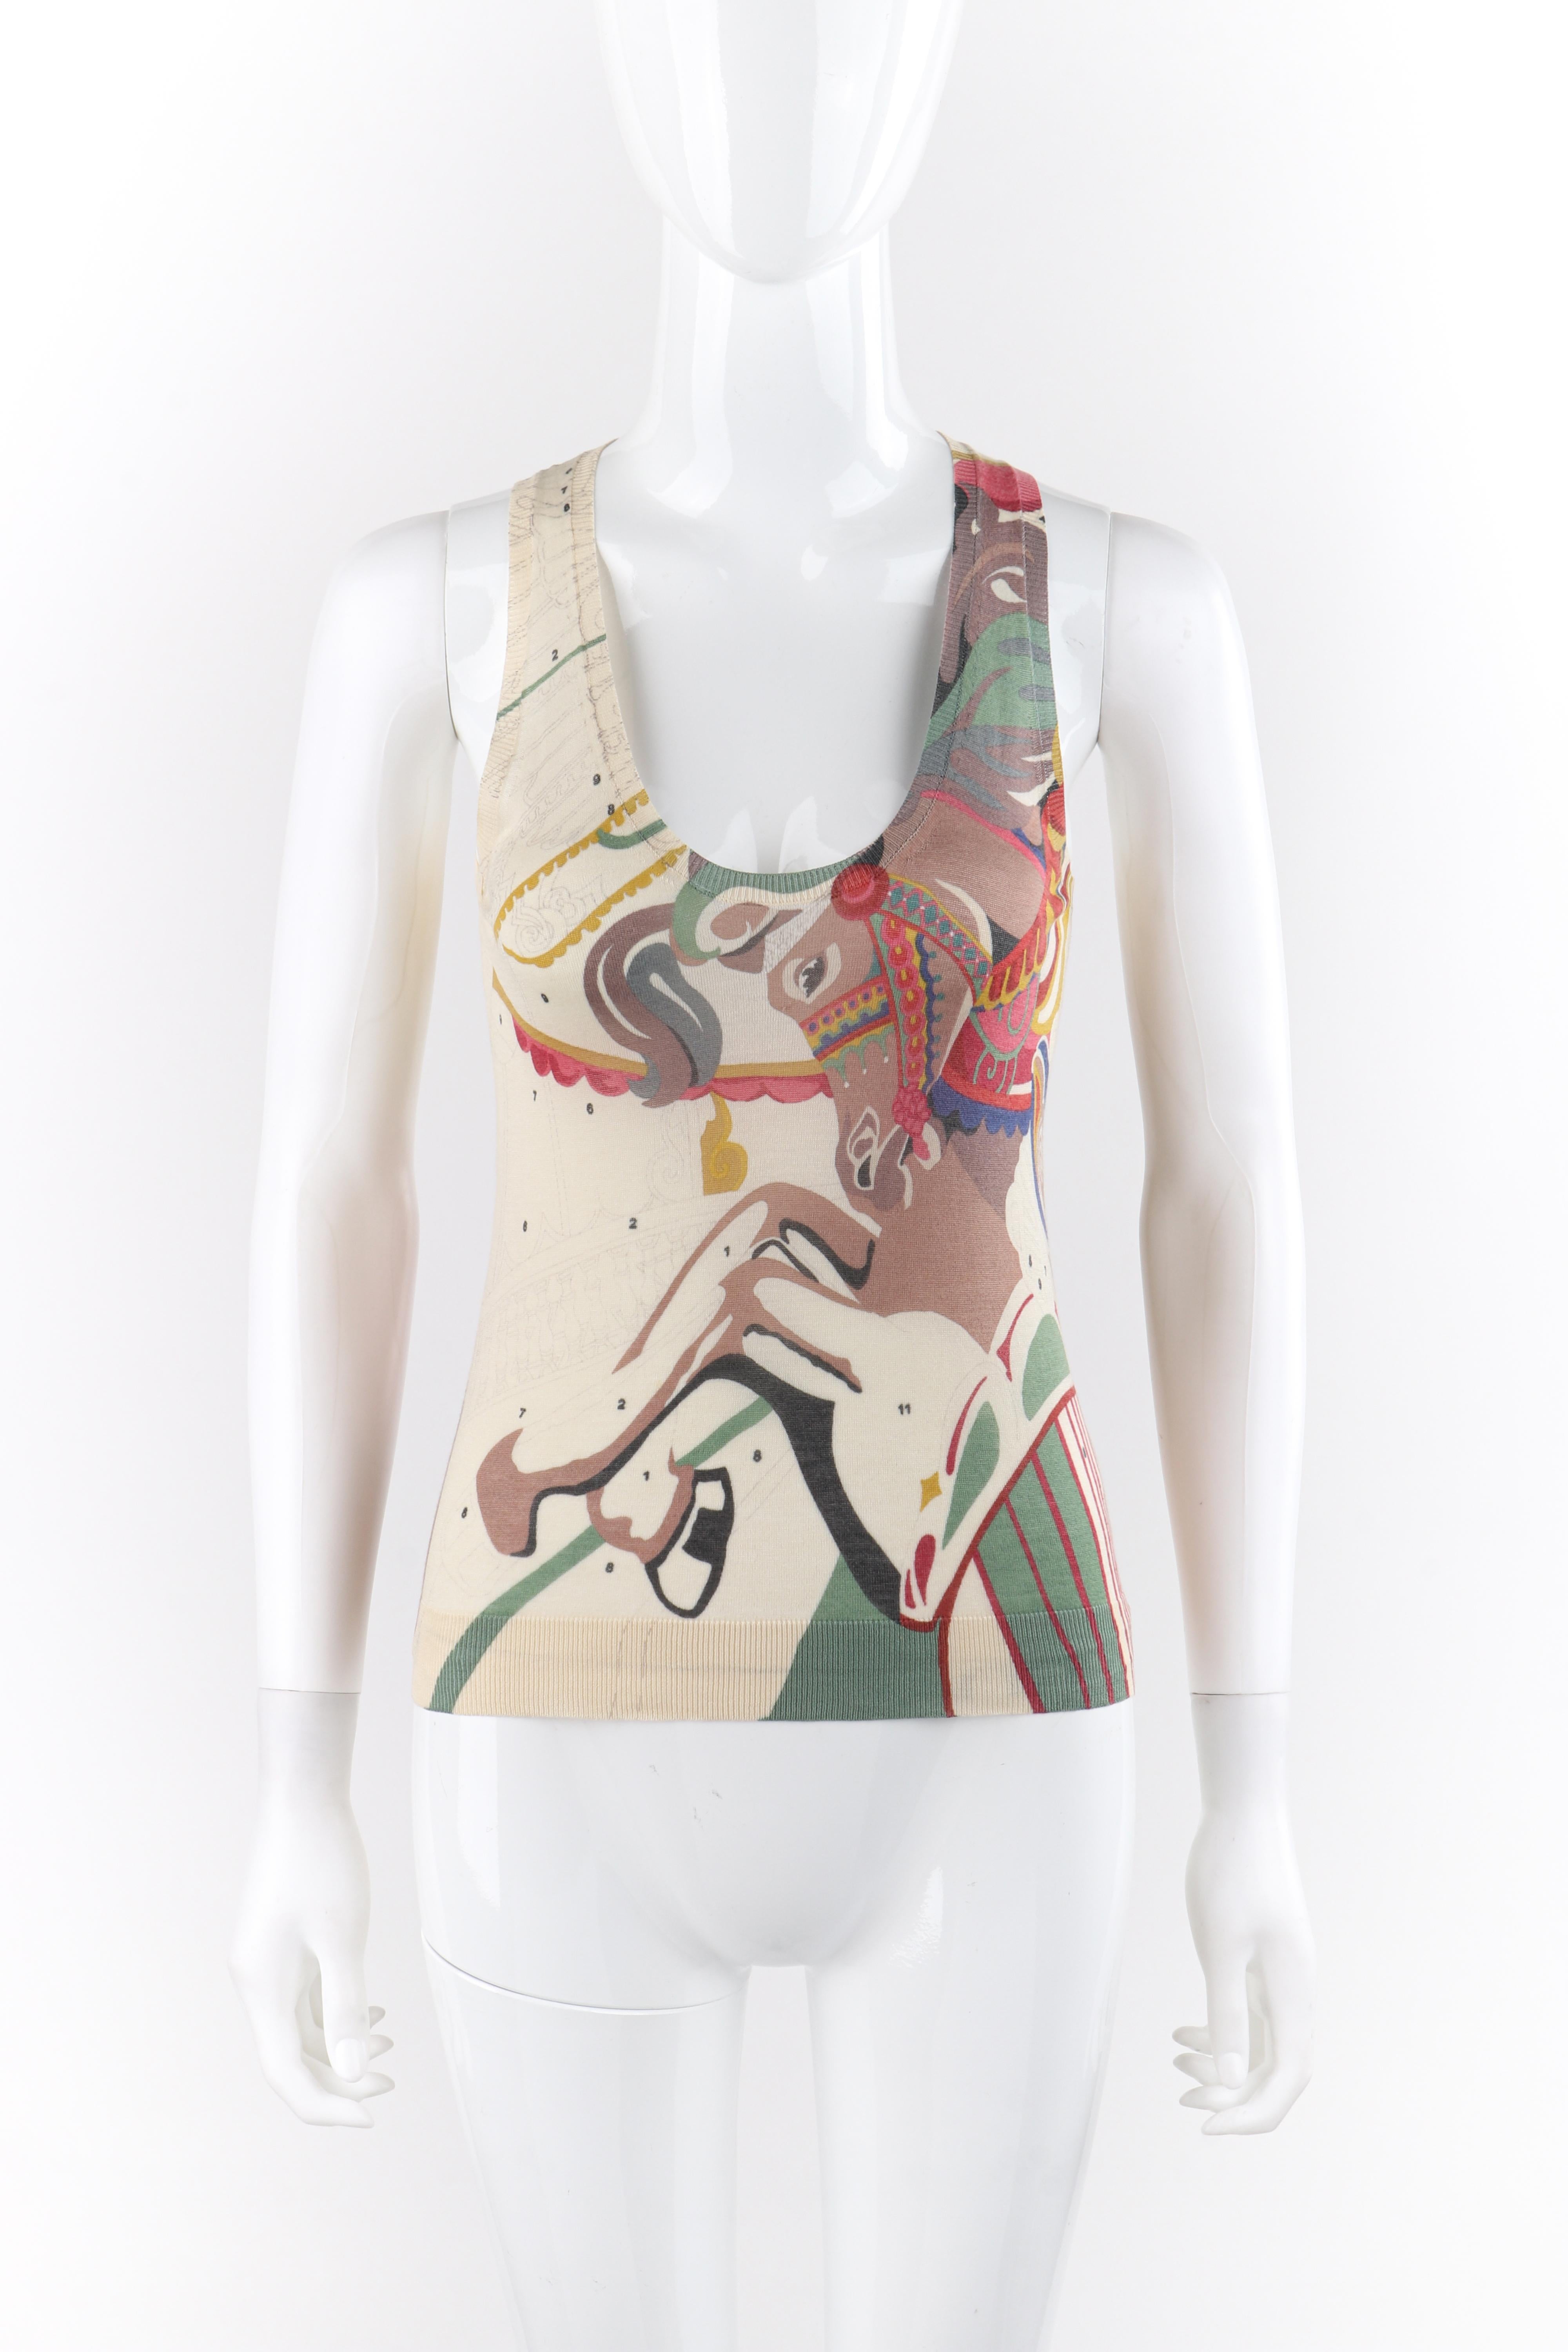 ALEXANDER McQUEEN S/S 2005 “It's Only a Game” Carousel Horse Sleeveless Knit Top
 
Brand / Manufacturer: Alexander McQueen
Collection: S/S 2005 “It's Only a Game” 
Designer: Alexander McQueen 
Style: Knit tank top
Color(s): Shades of beige, tan,